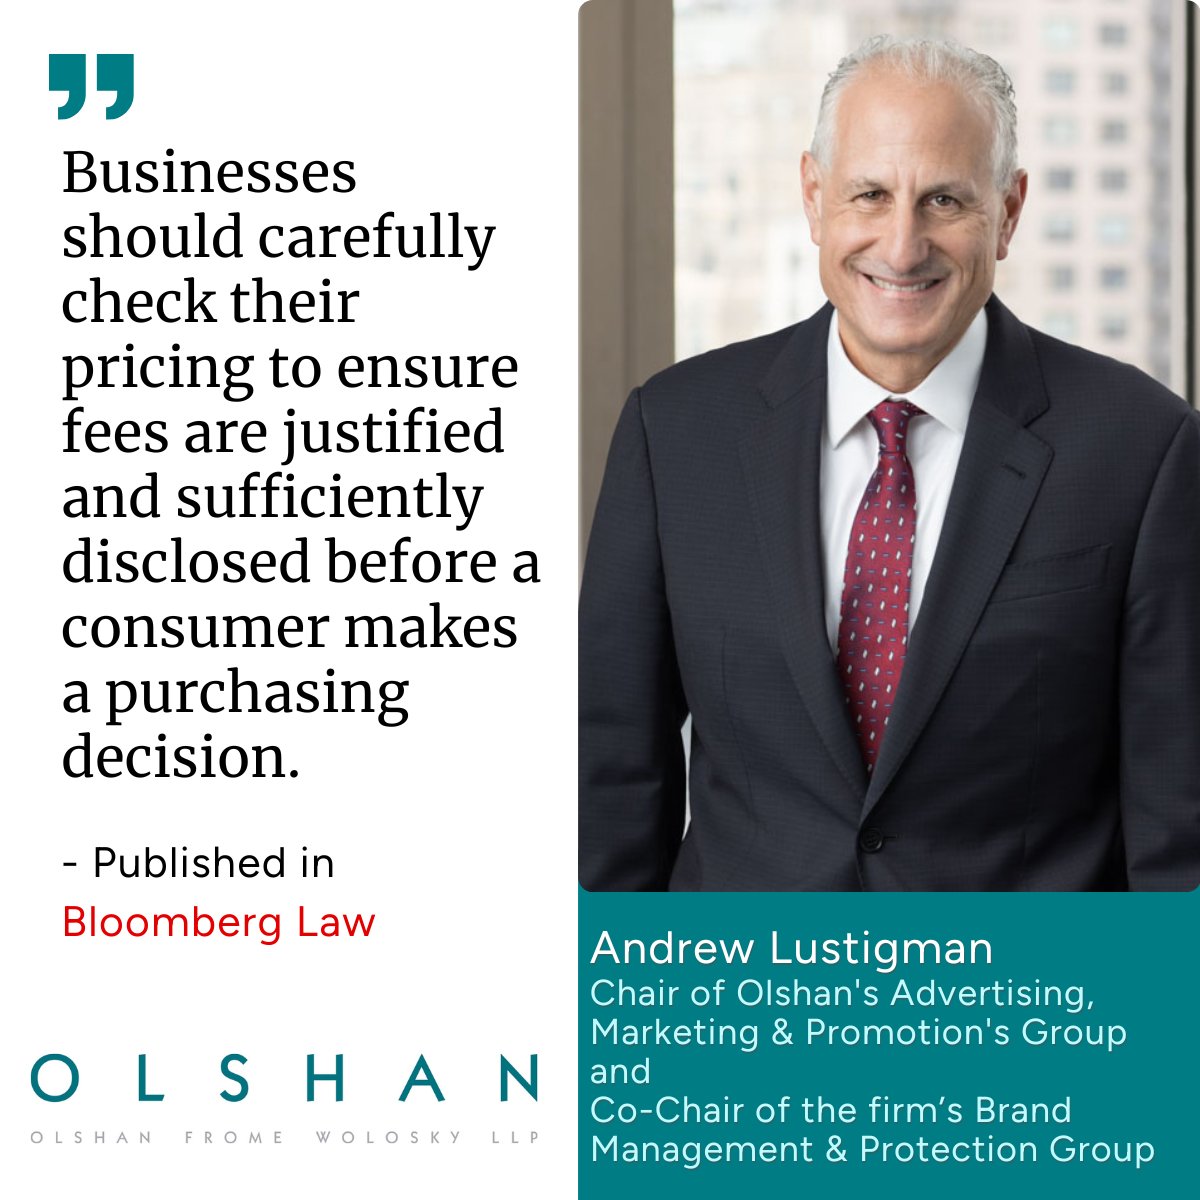 .@OlshanLaw Andrew Lustigman Publishes Article in @BLaw on How New Laws and Consumer Actions Will Help Us Say Goodbye to Junk Fees 
#OlshanLaw #JunkFees #ConsumerProtection #JunkFeePrevention #ConsumerRights #Bloomberg #AdvertisingAndMarketing 

lnkd.in/edMmqdJd